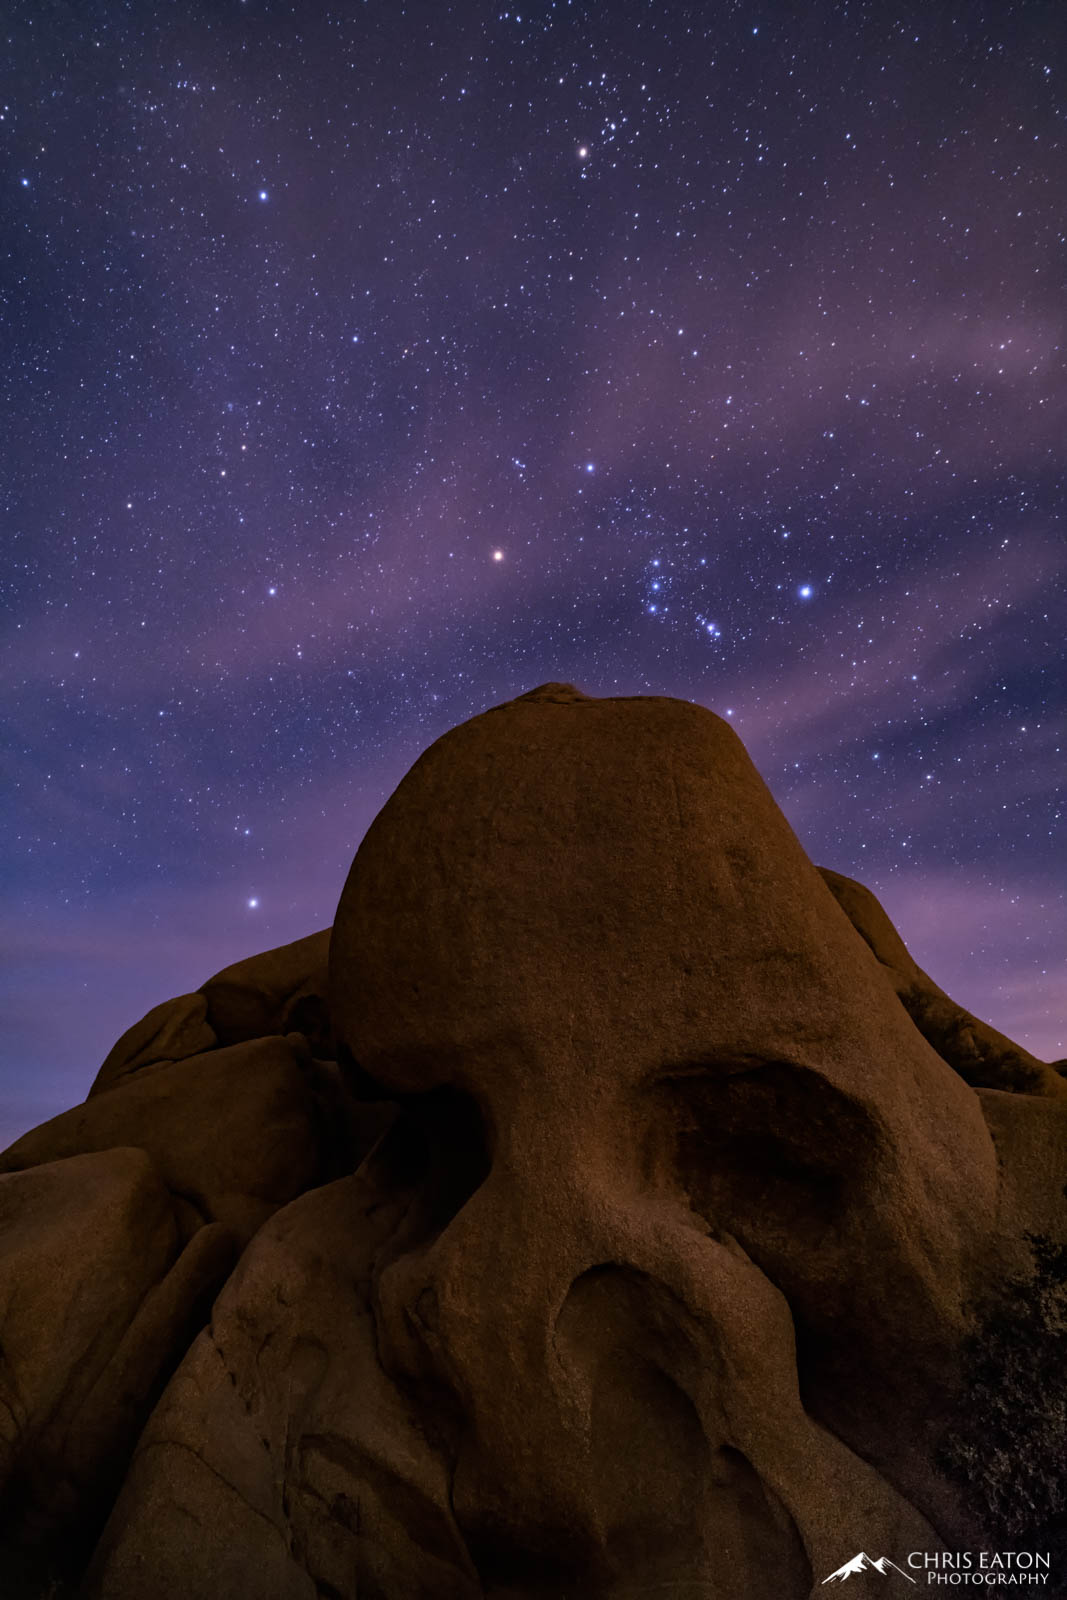 The constellation Orion rises above Skull Rock in the Jumbo Rocks area of Joshua Tree National Park.